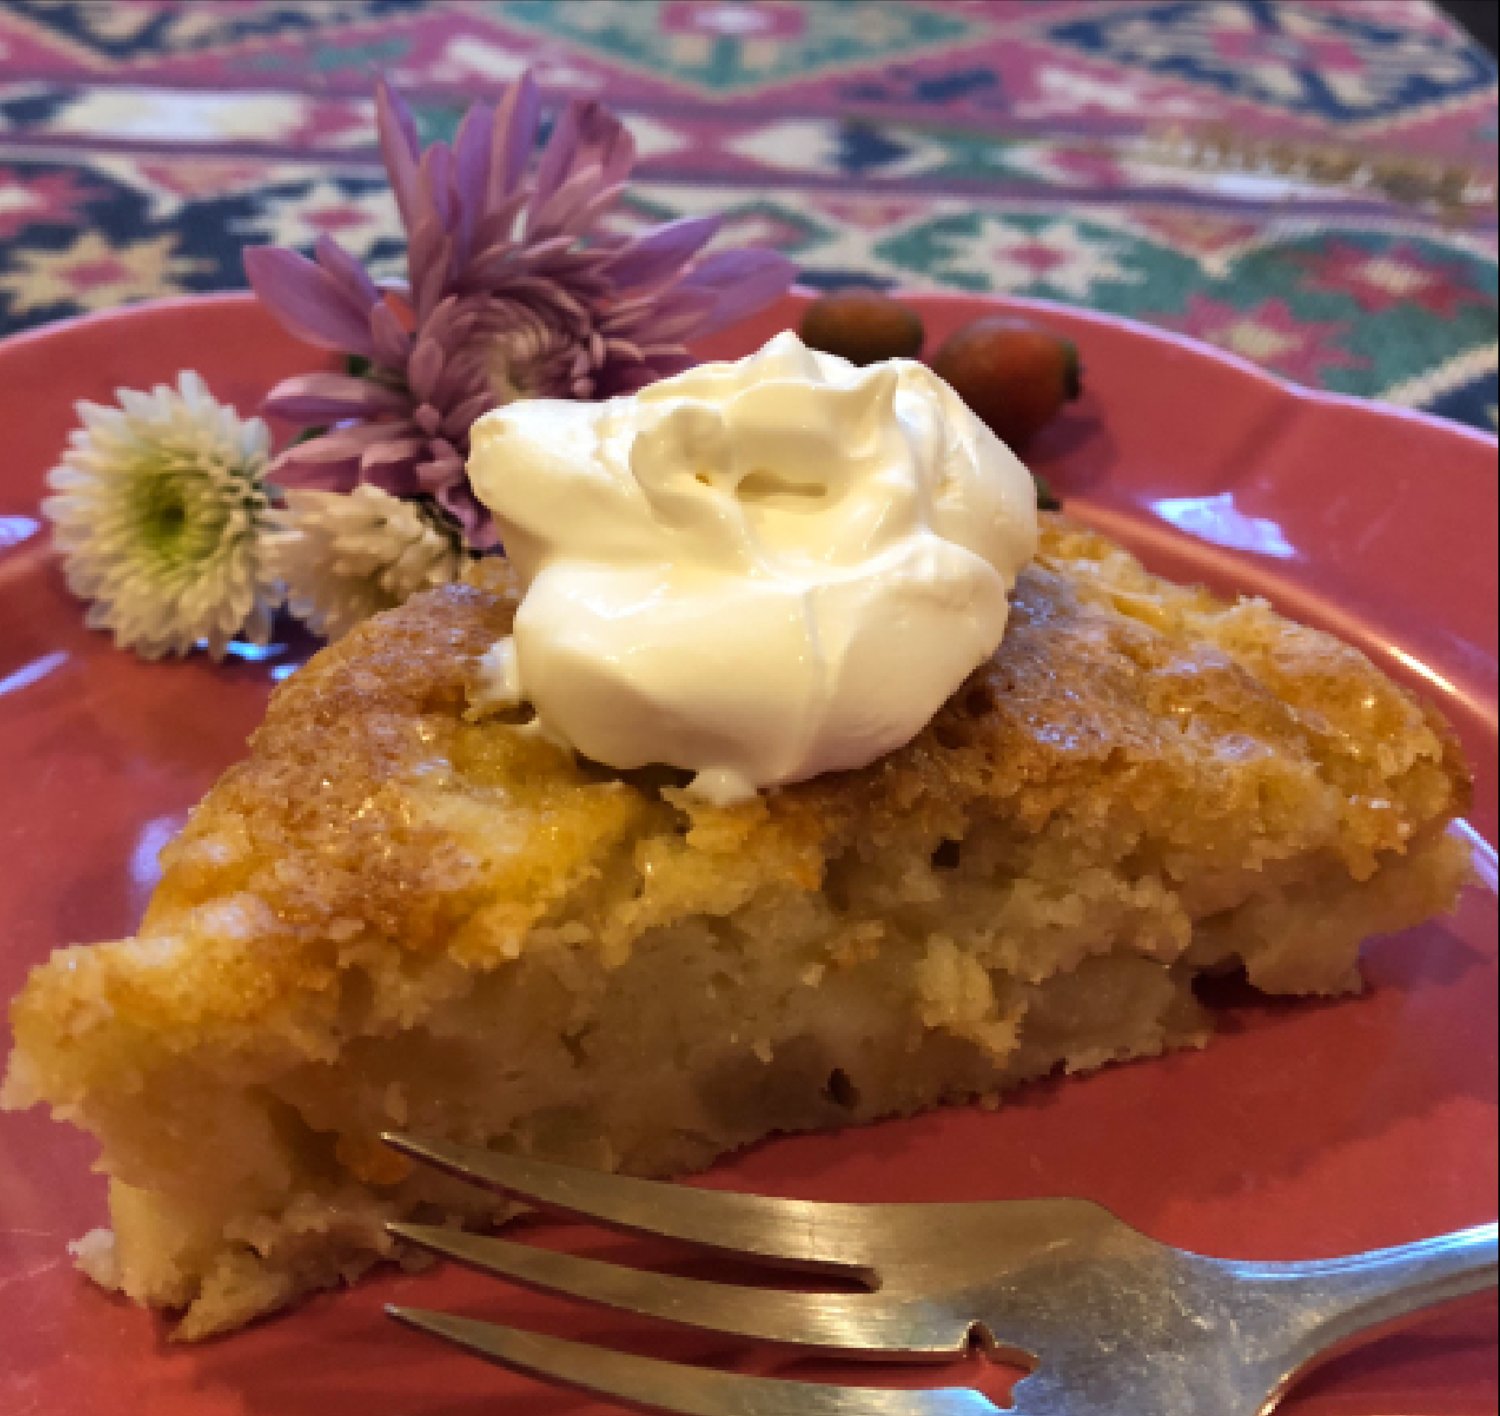 While traditional French apple cakes are typically made with rum, I&M food writer Sarah Leah Chase prefers to use Calvados – Normandy’s apple brandy – or Cognac instead. The flavor of the alcohol does not end up dominant in the end result.